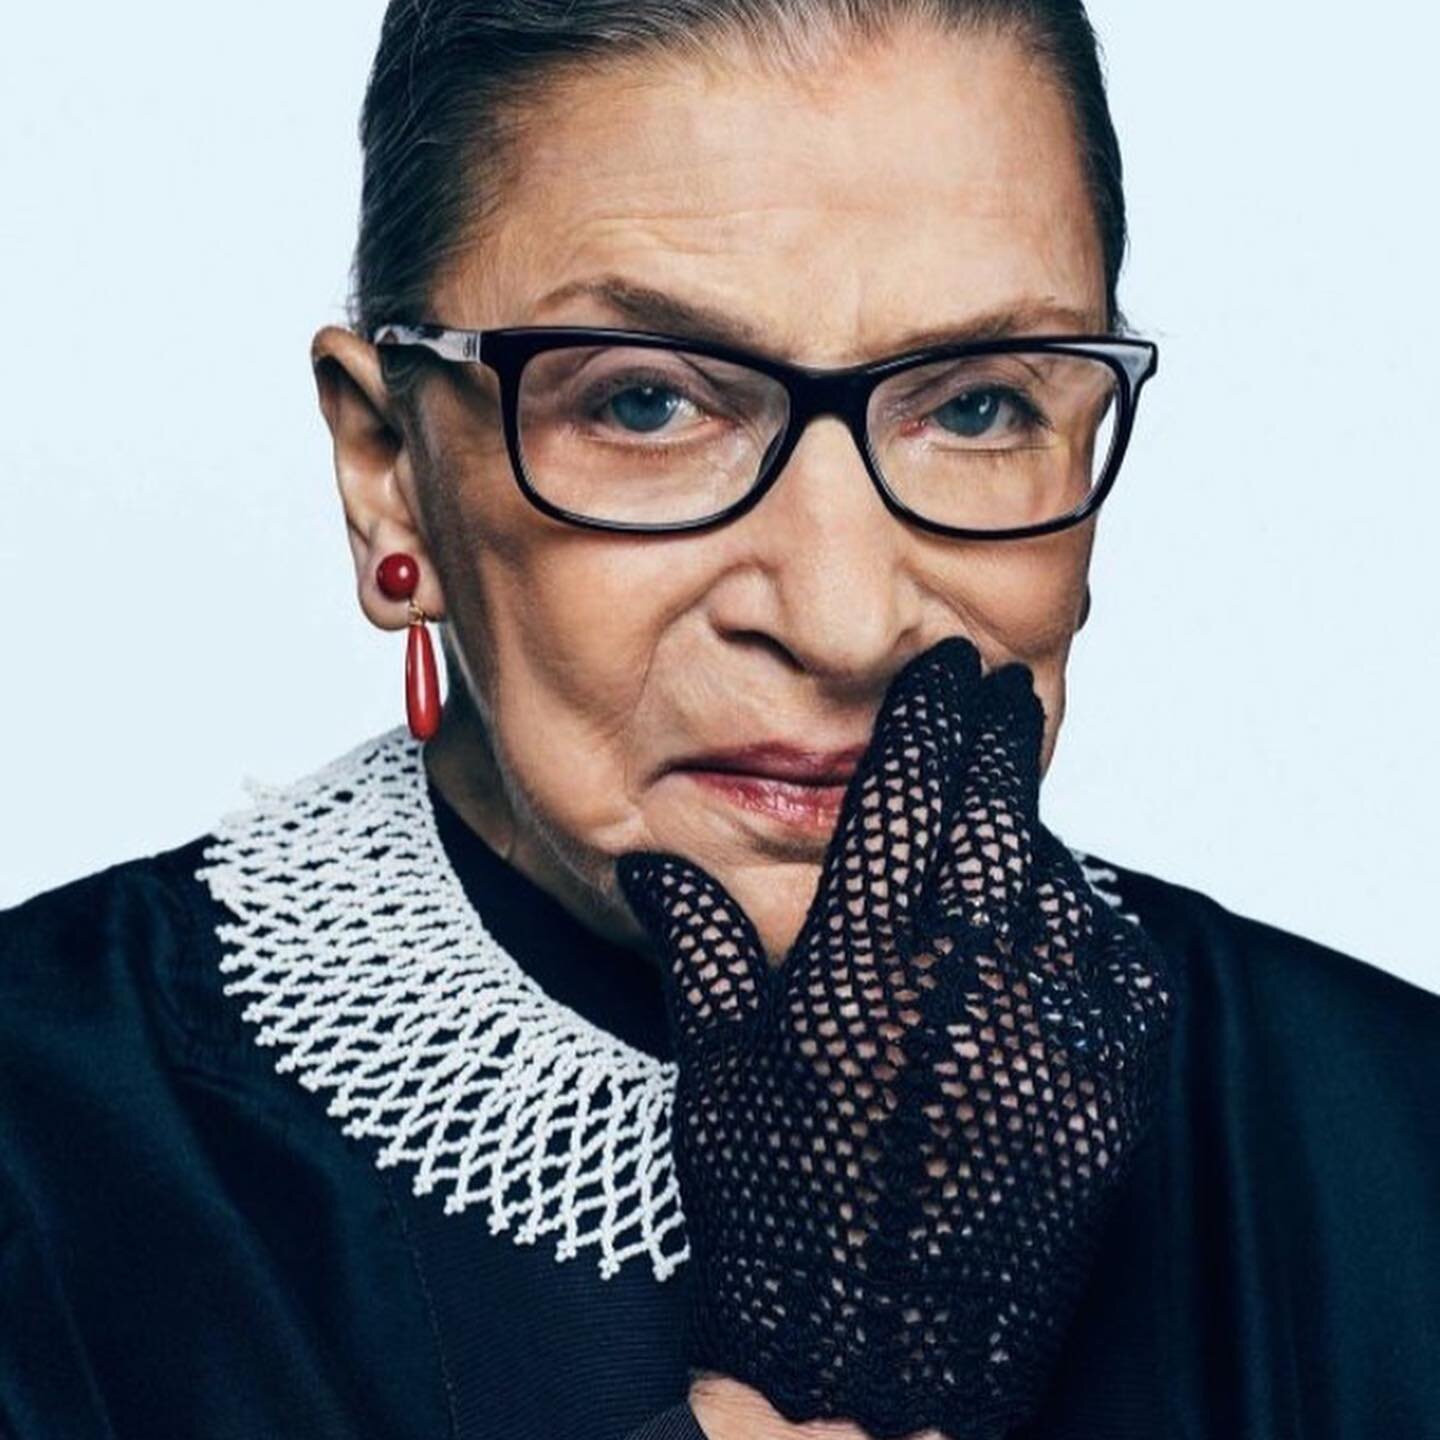 We mourn the passing of Ruth Bader Ginsburg today. We are all indebted to her and her lifelong commitment to fighting for women&rsquo;s rights. Tonight we mourn, tomorrow we fight on in her honor. #RBG